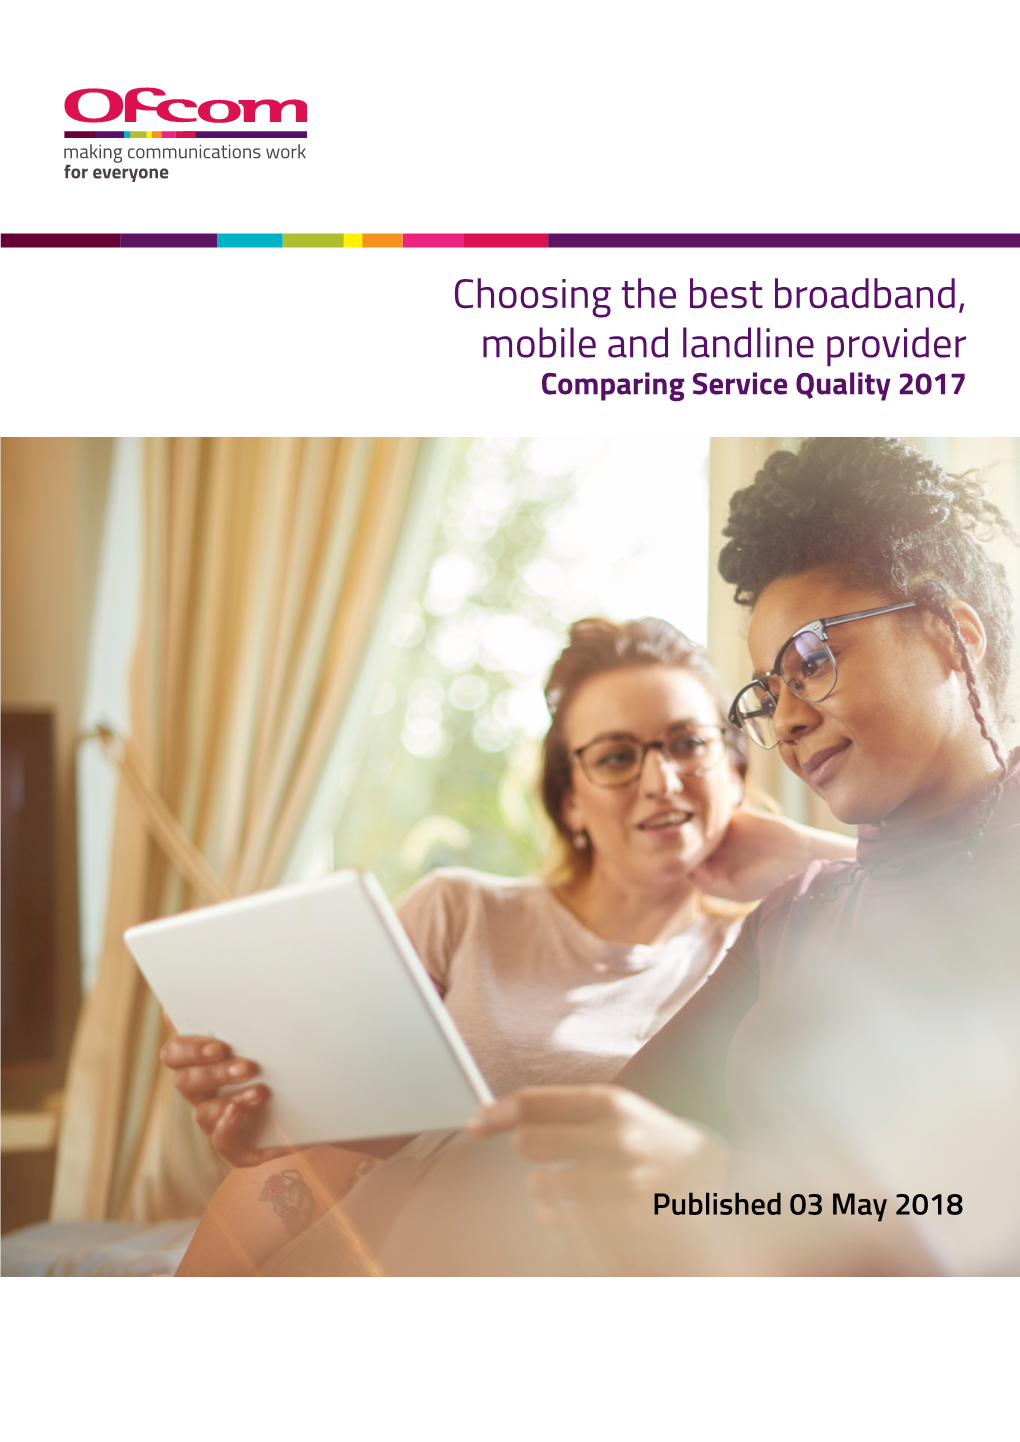 Choosing the Best Broadband, Mobile and Landline Provider Comparing Service Quality 2017